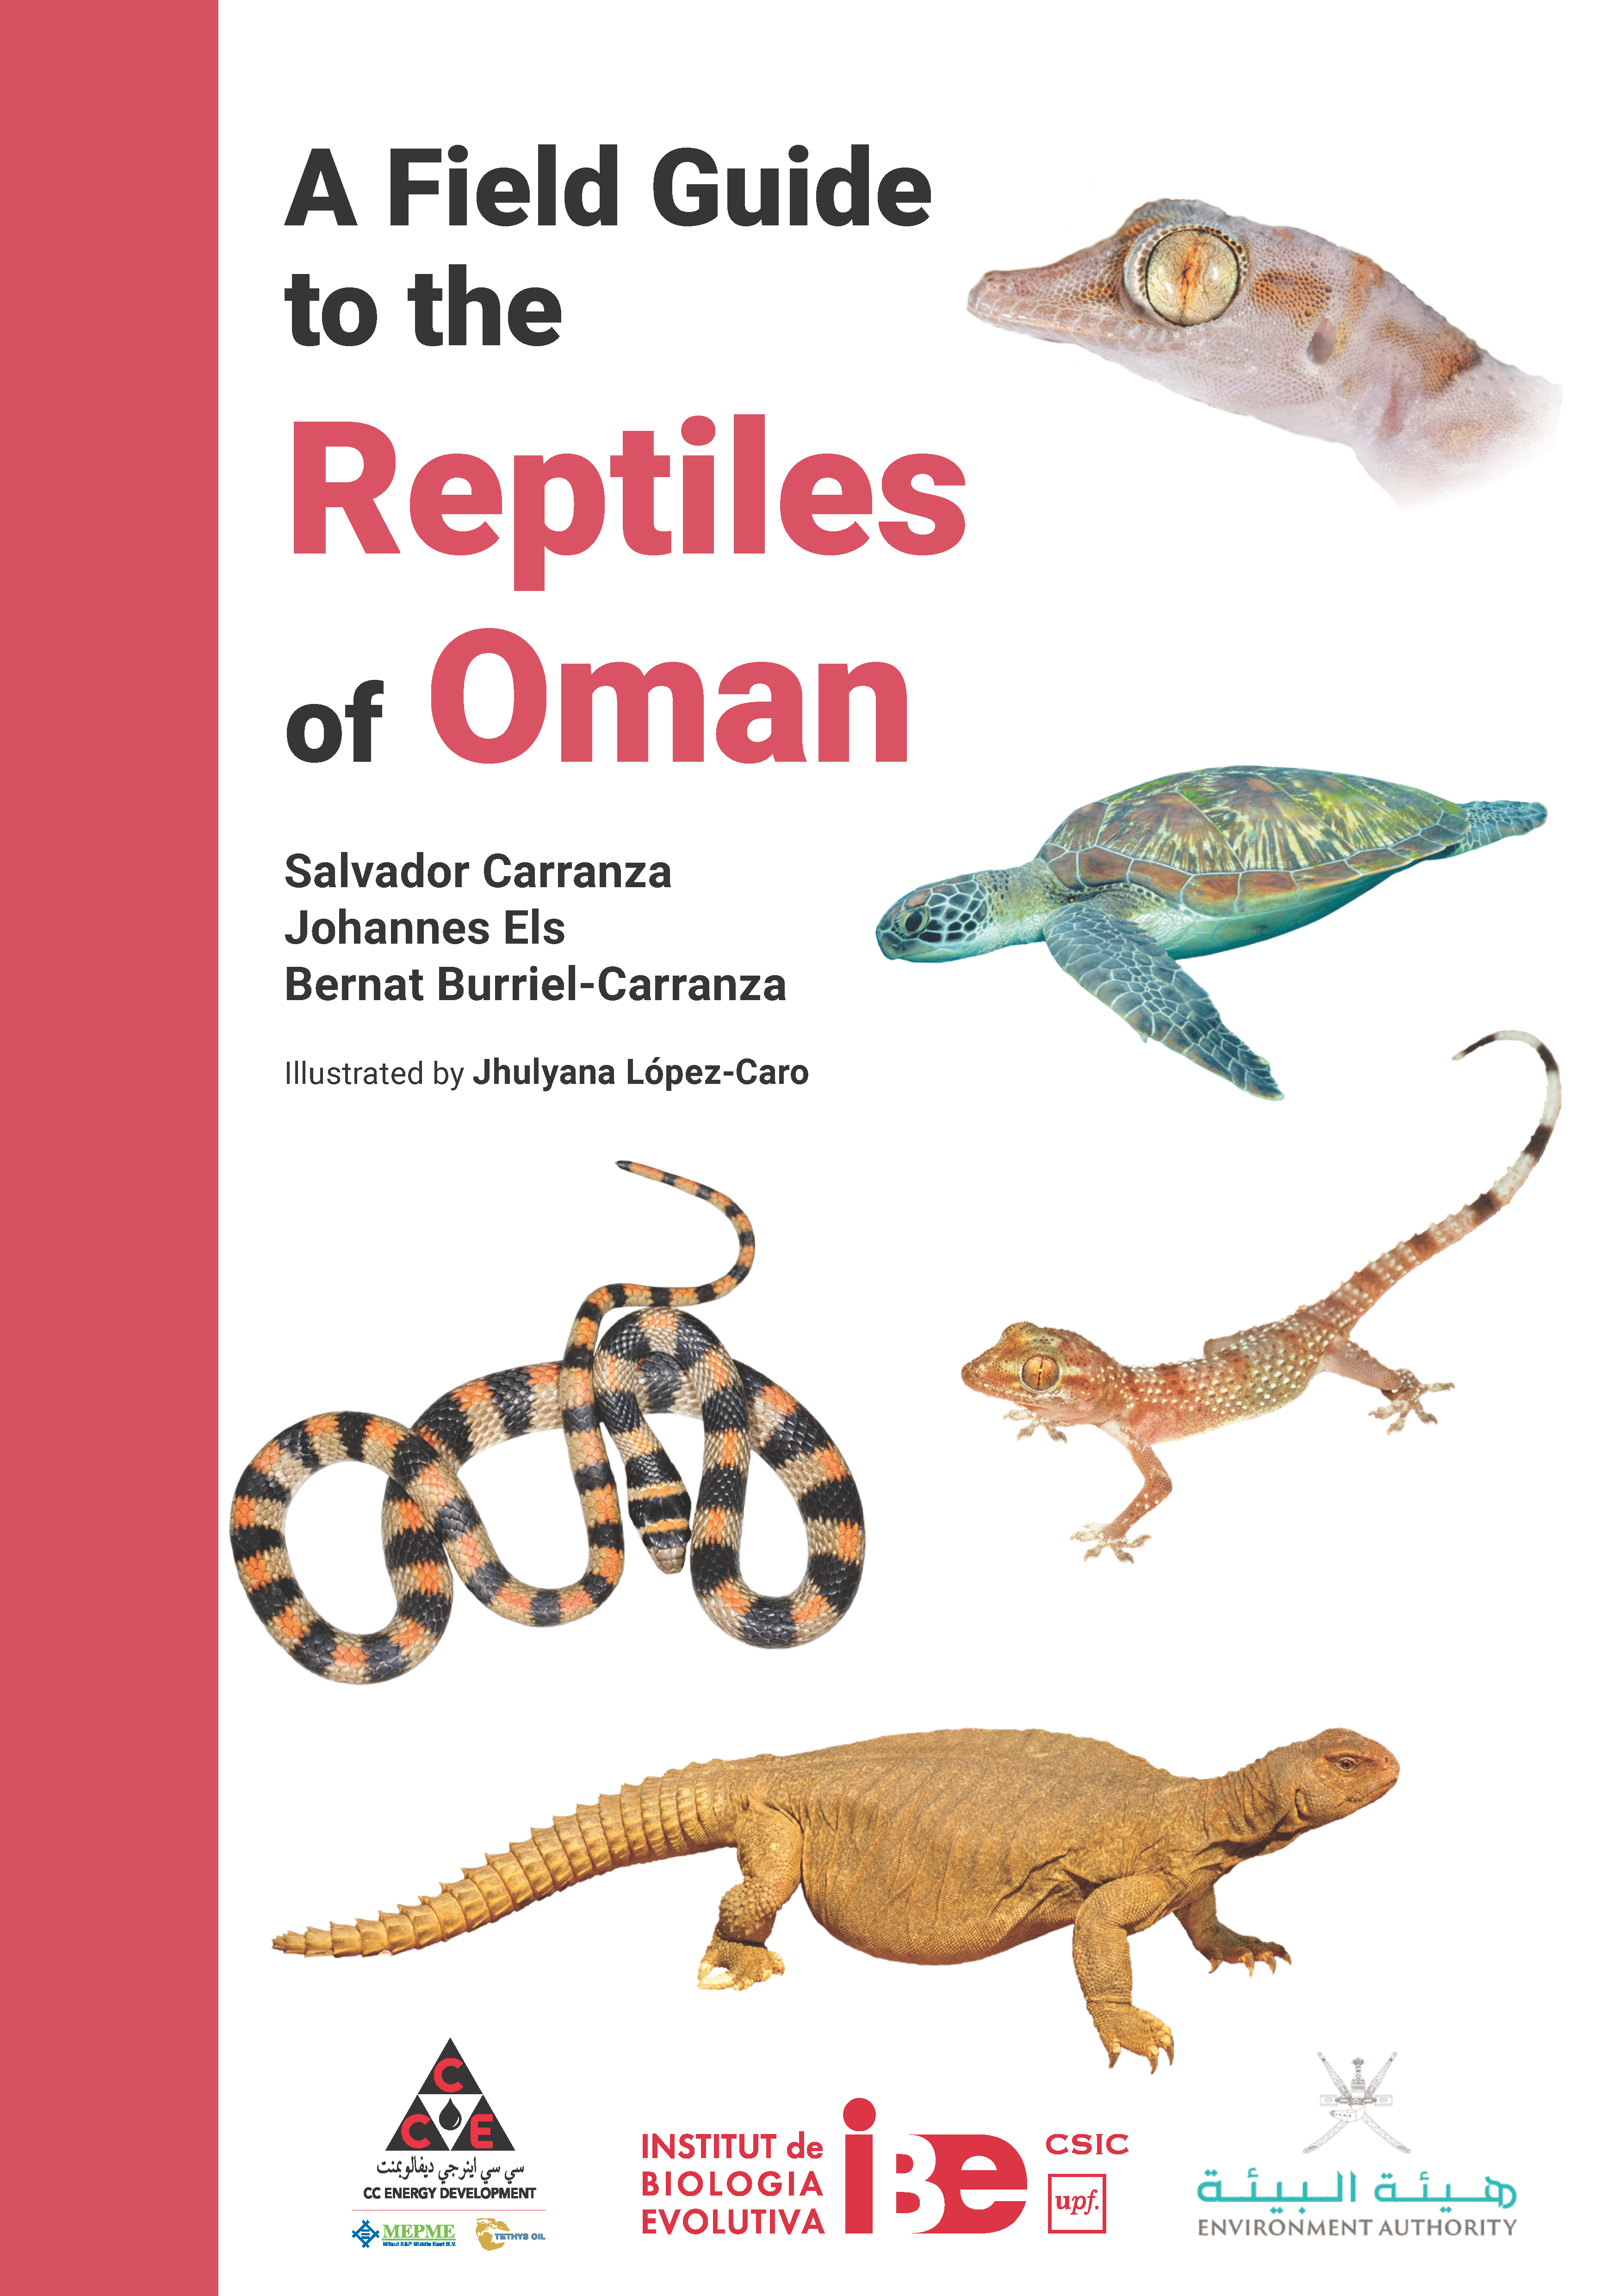 A field guide to the reptiles of Oman